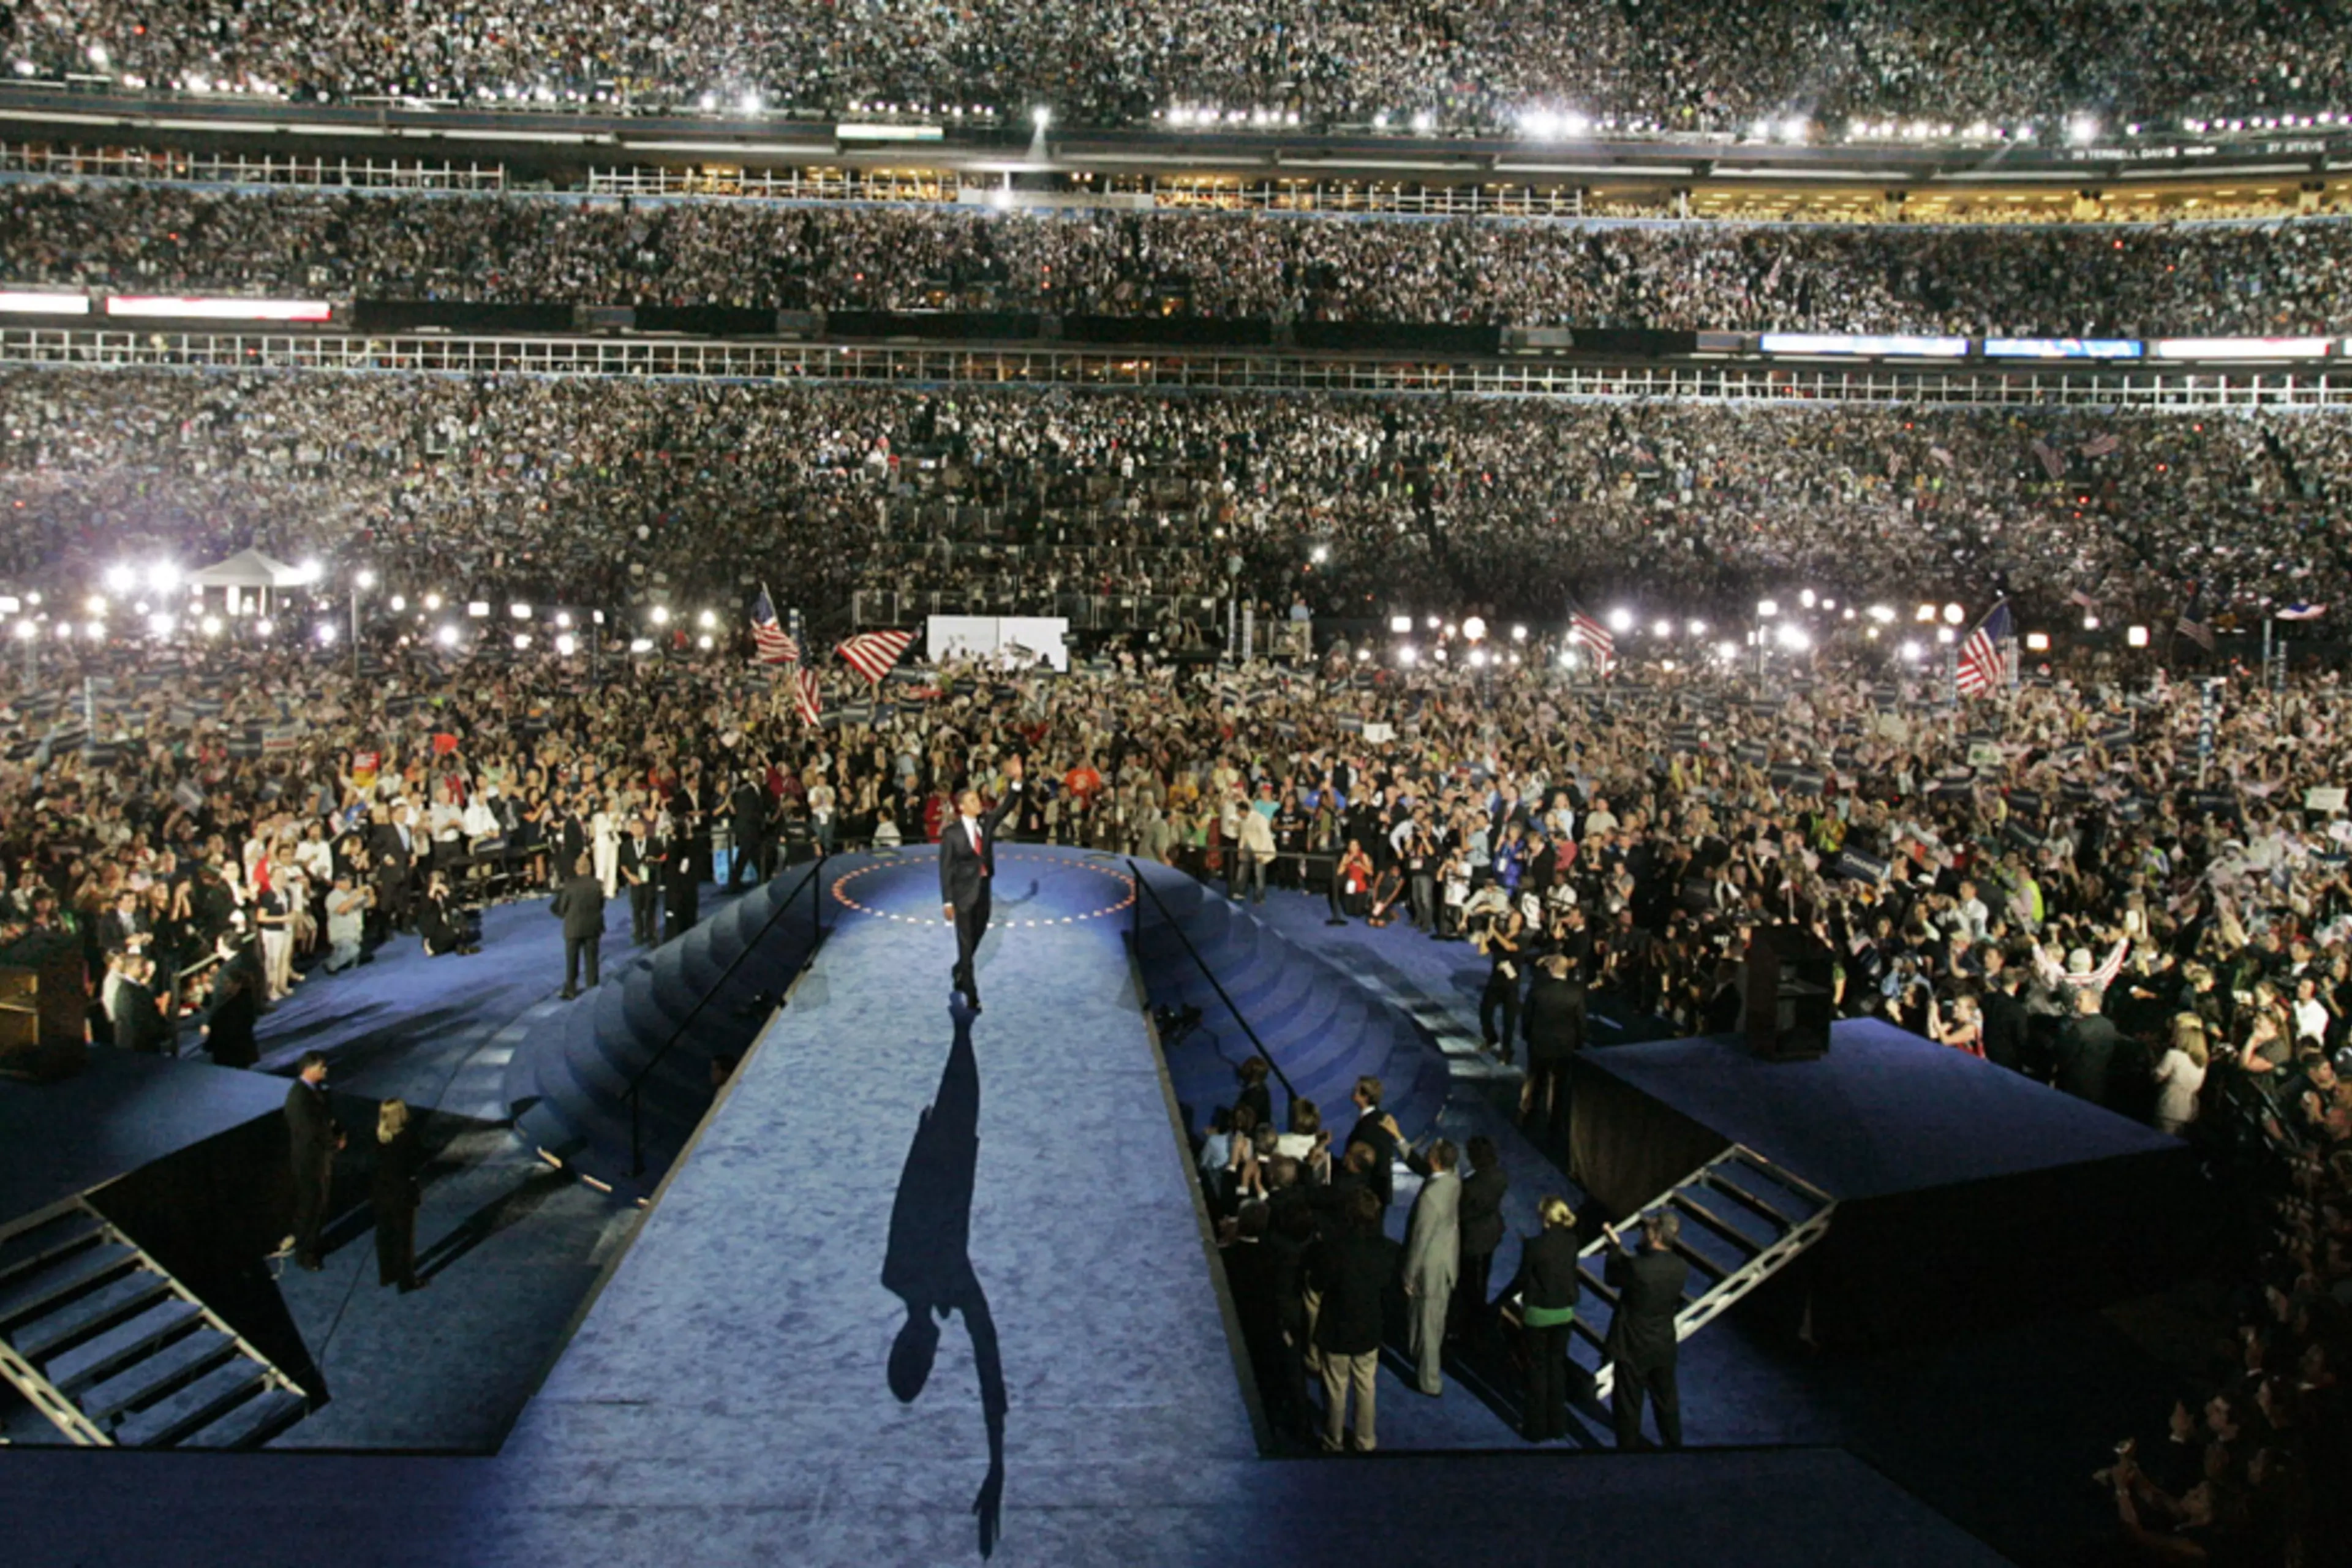 Sen. Barack Obama waves to the crowd at the 2008 Democratic National Convention.